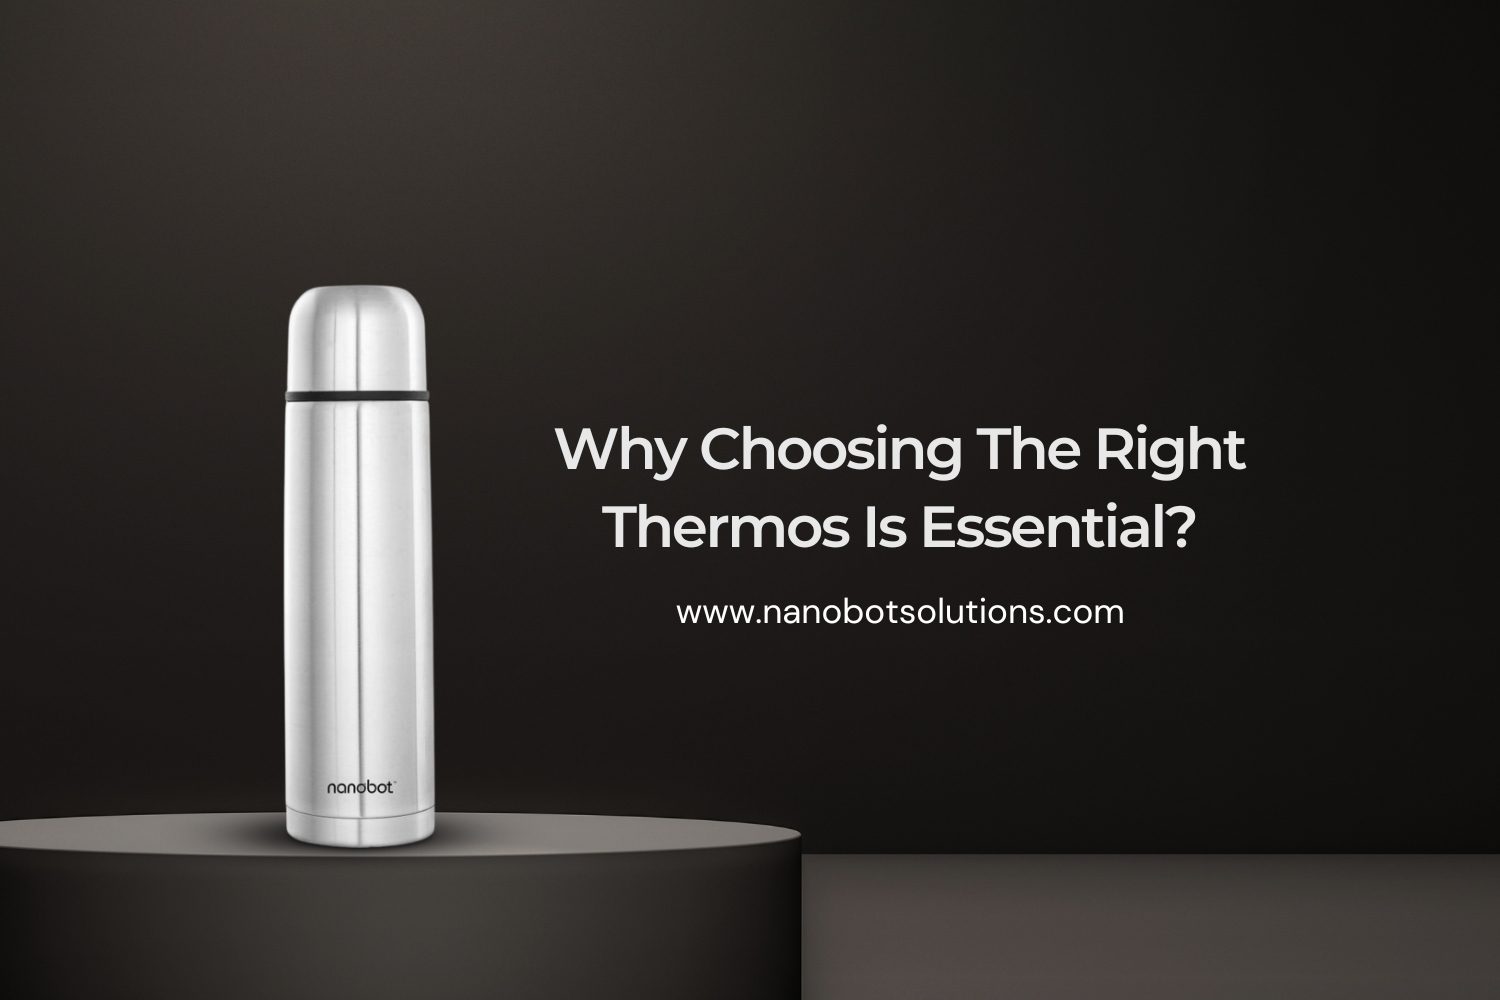 Why Choosing The Right Thermos Is Essential compressed 1 | Nanobot